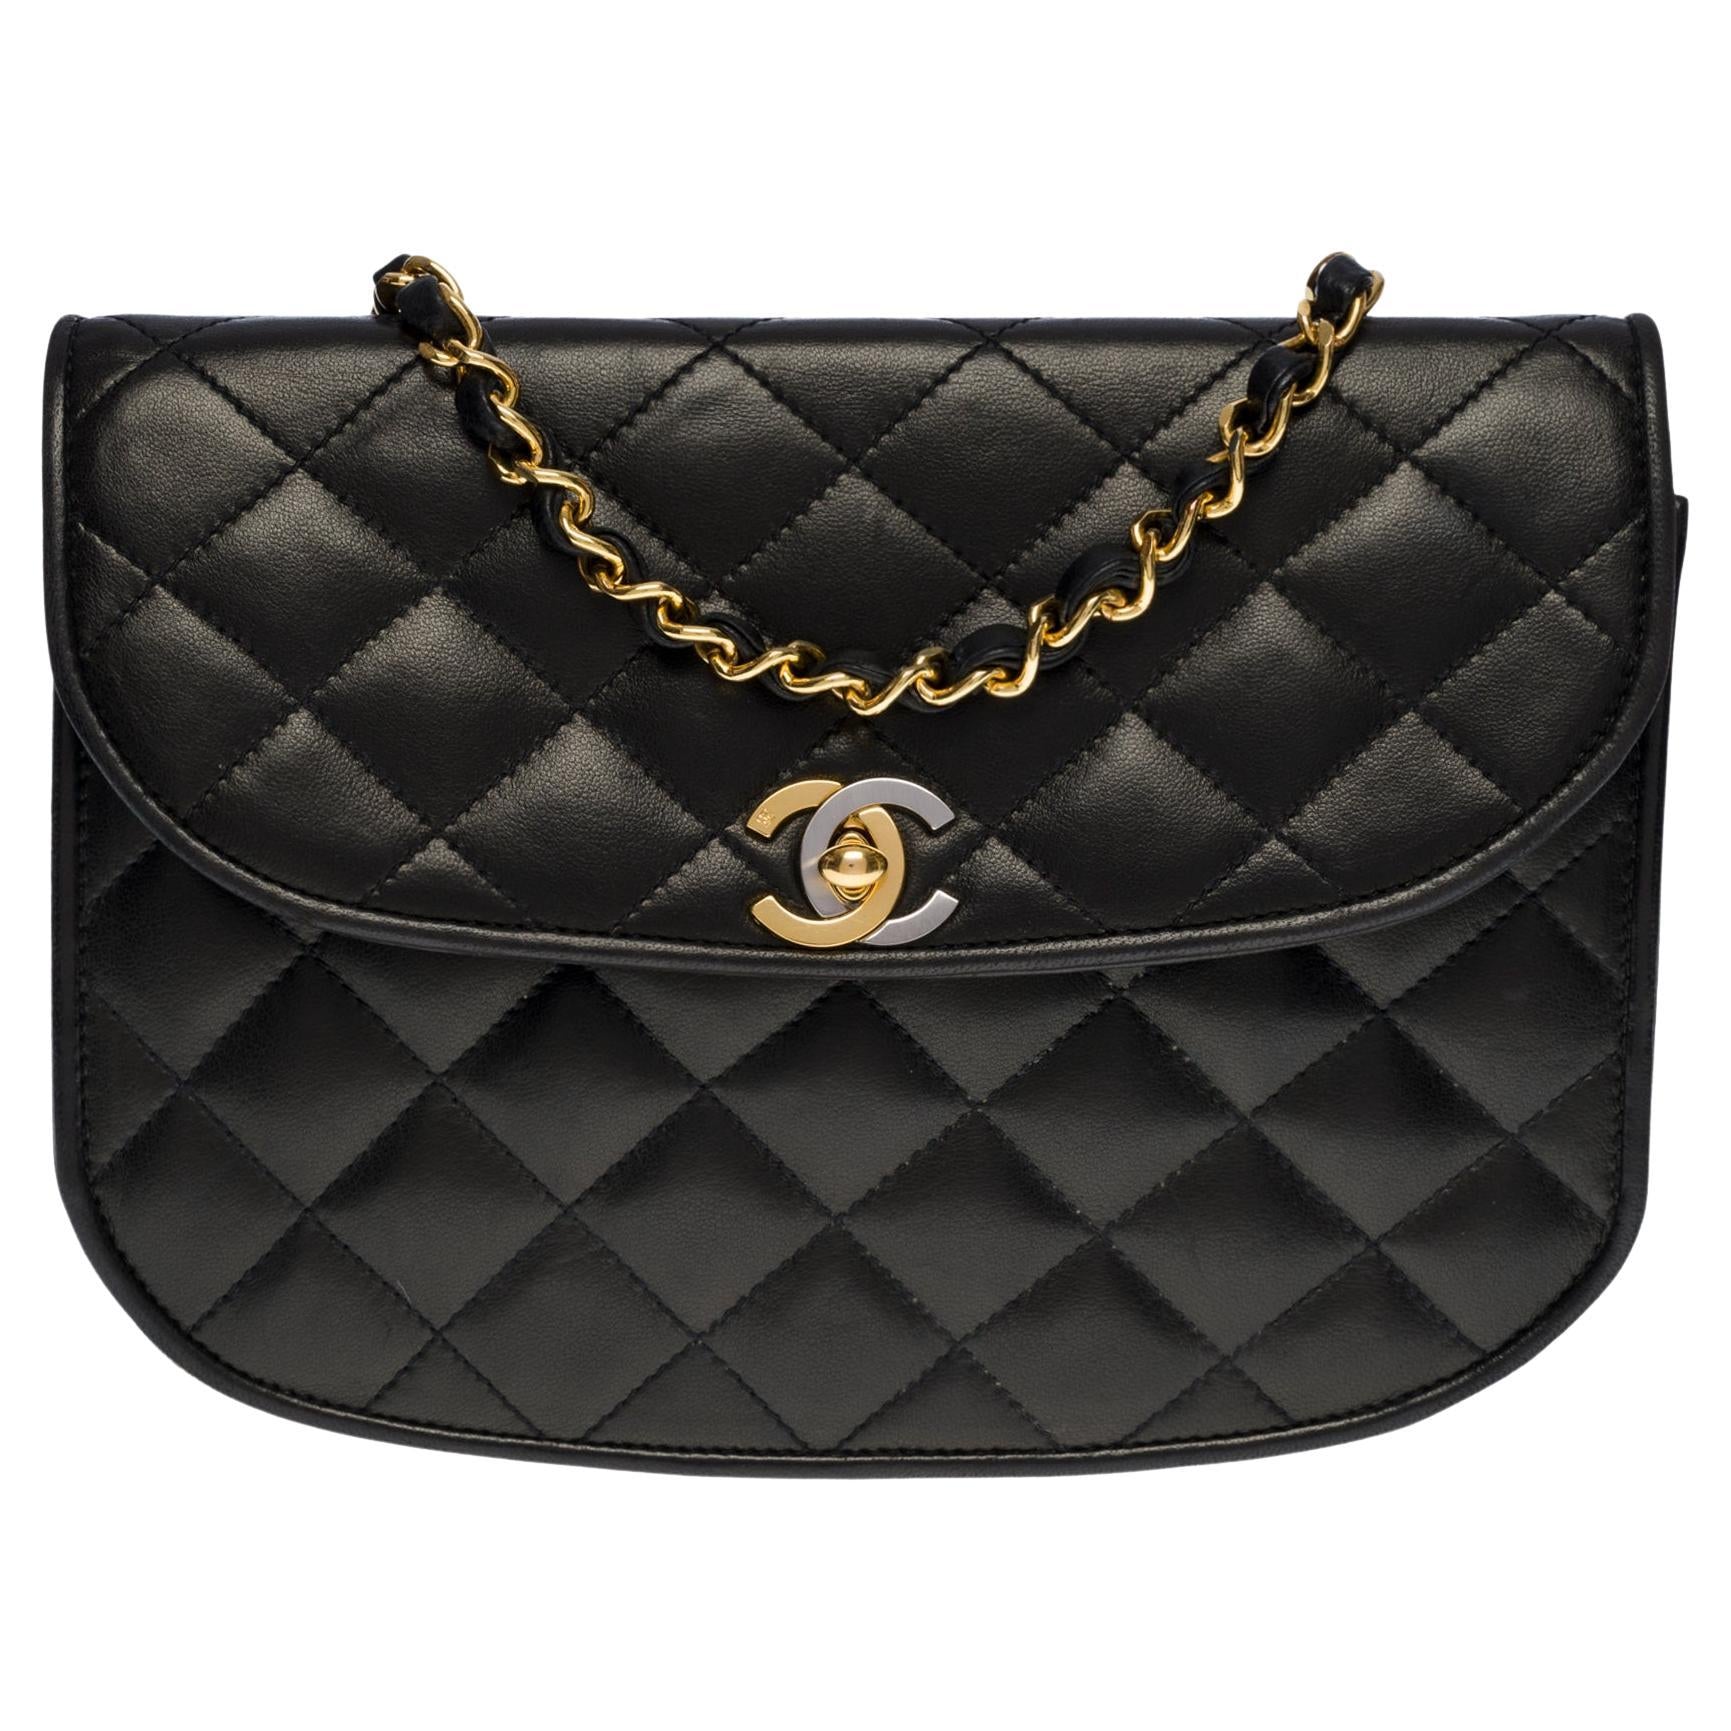 Chanel Rare Classic Flap Shoulder Bag in Black Quilted Lambskin, GHW